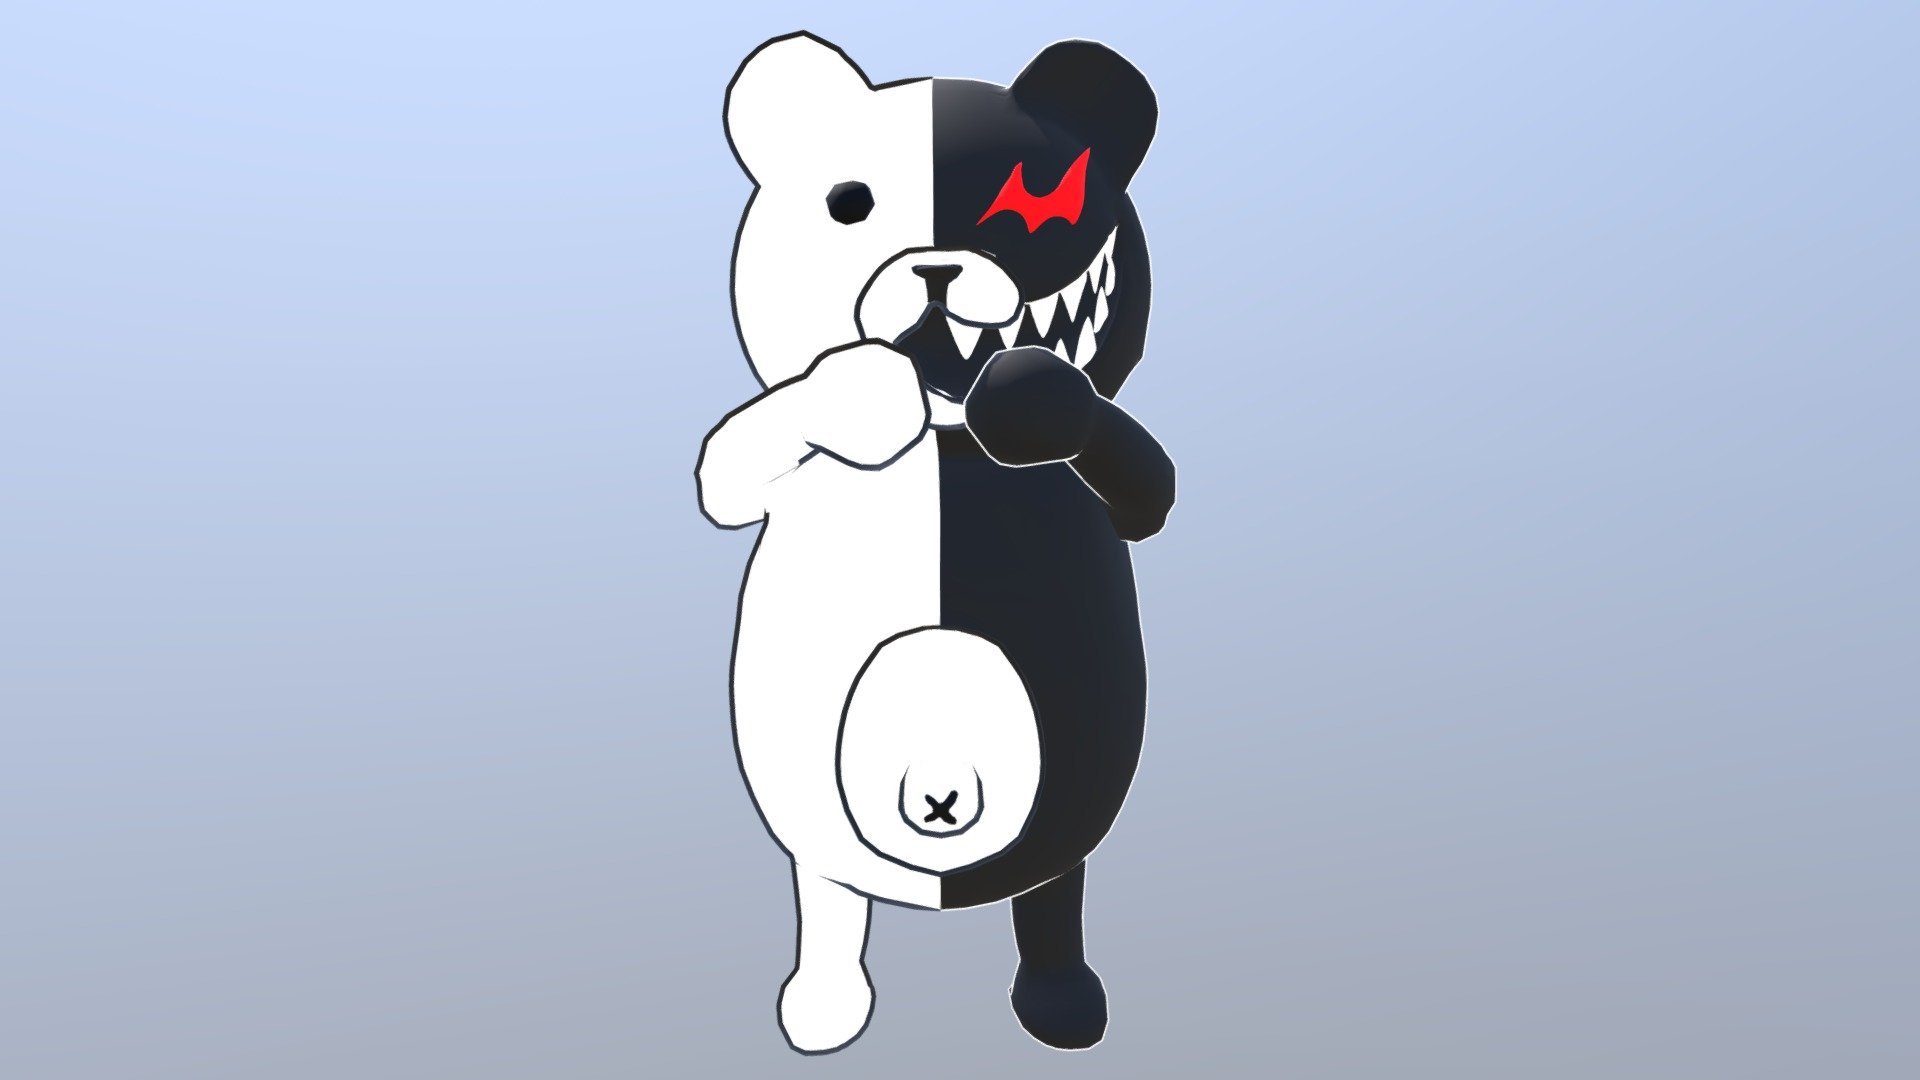 Just a quick (not quite perfect) model of Monokuma, from the game Danganronpa 3d model